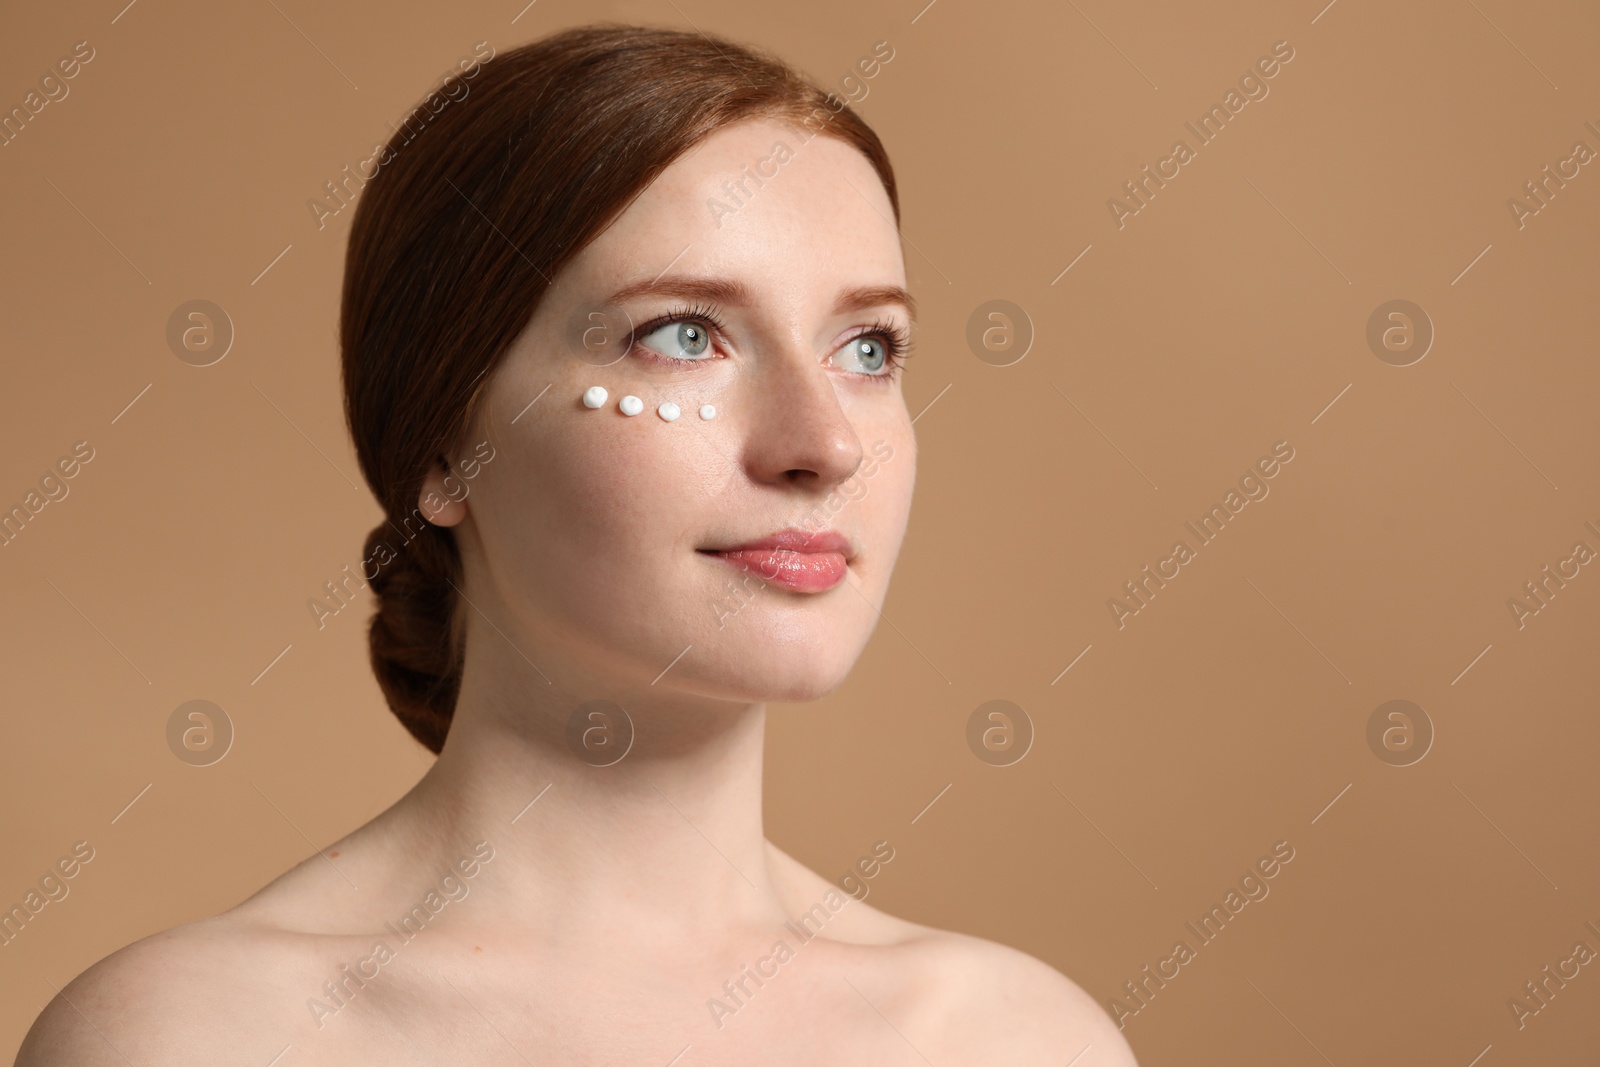 Photo of Beautiful woman with freckles and cream on her face against beige background. Space for text